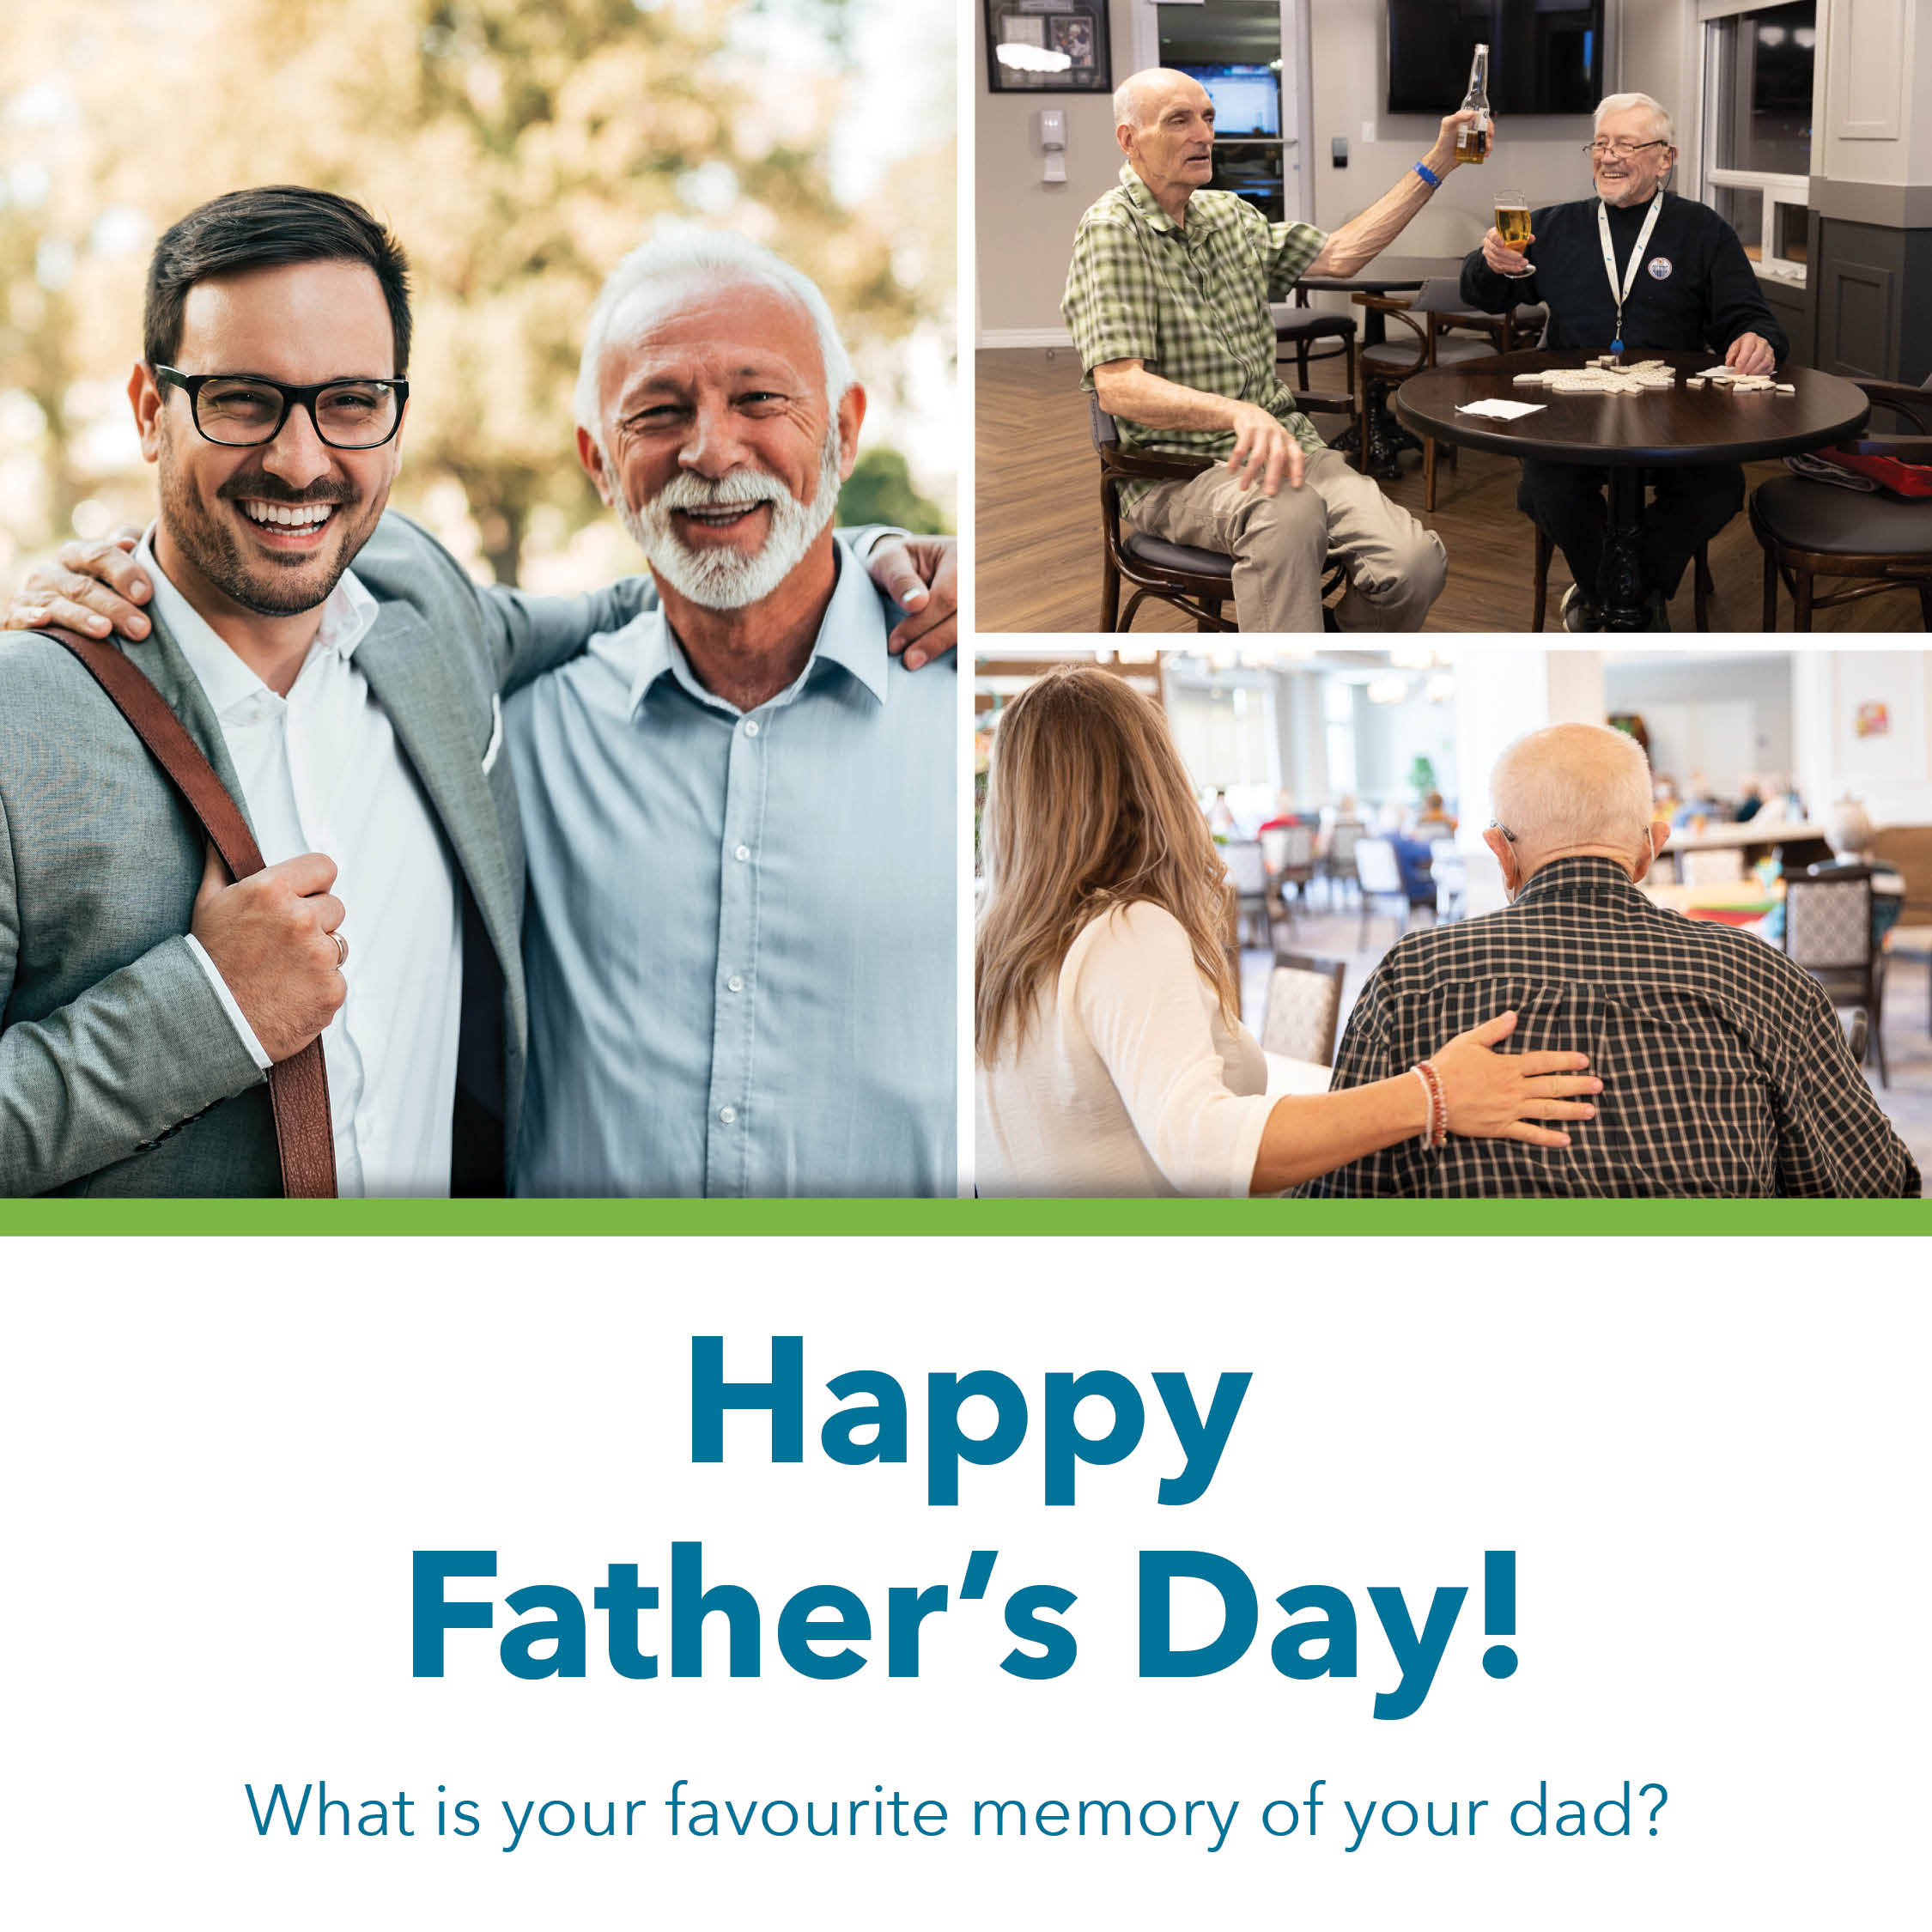 A Father's Day photo featuring three different pictures. A senior father with his son smiling, a couple of senior father's enjoying a drink together, and a father walking with a daughter.